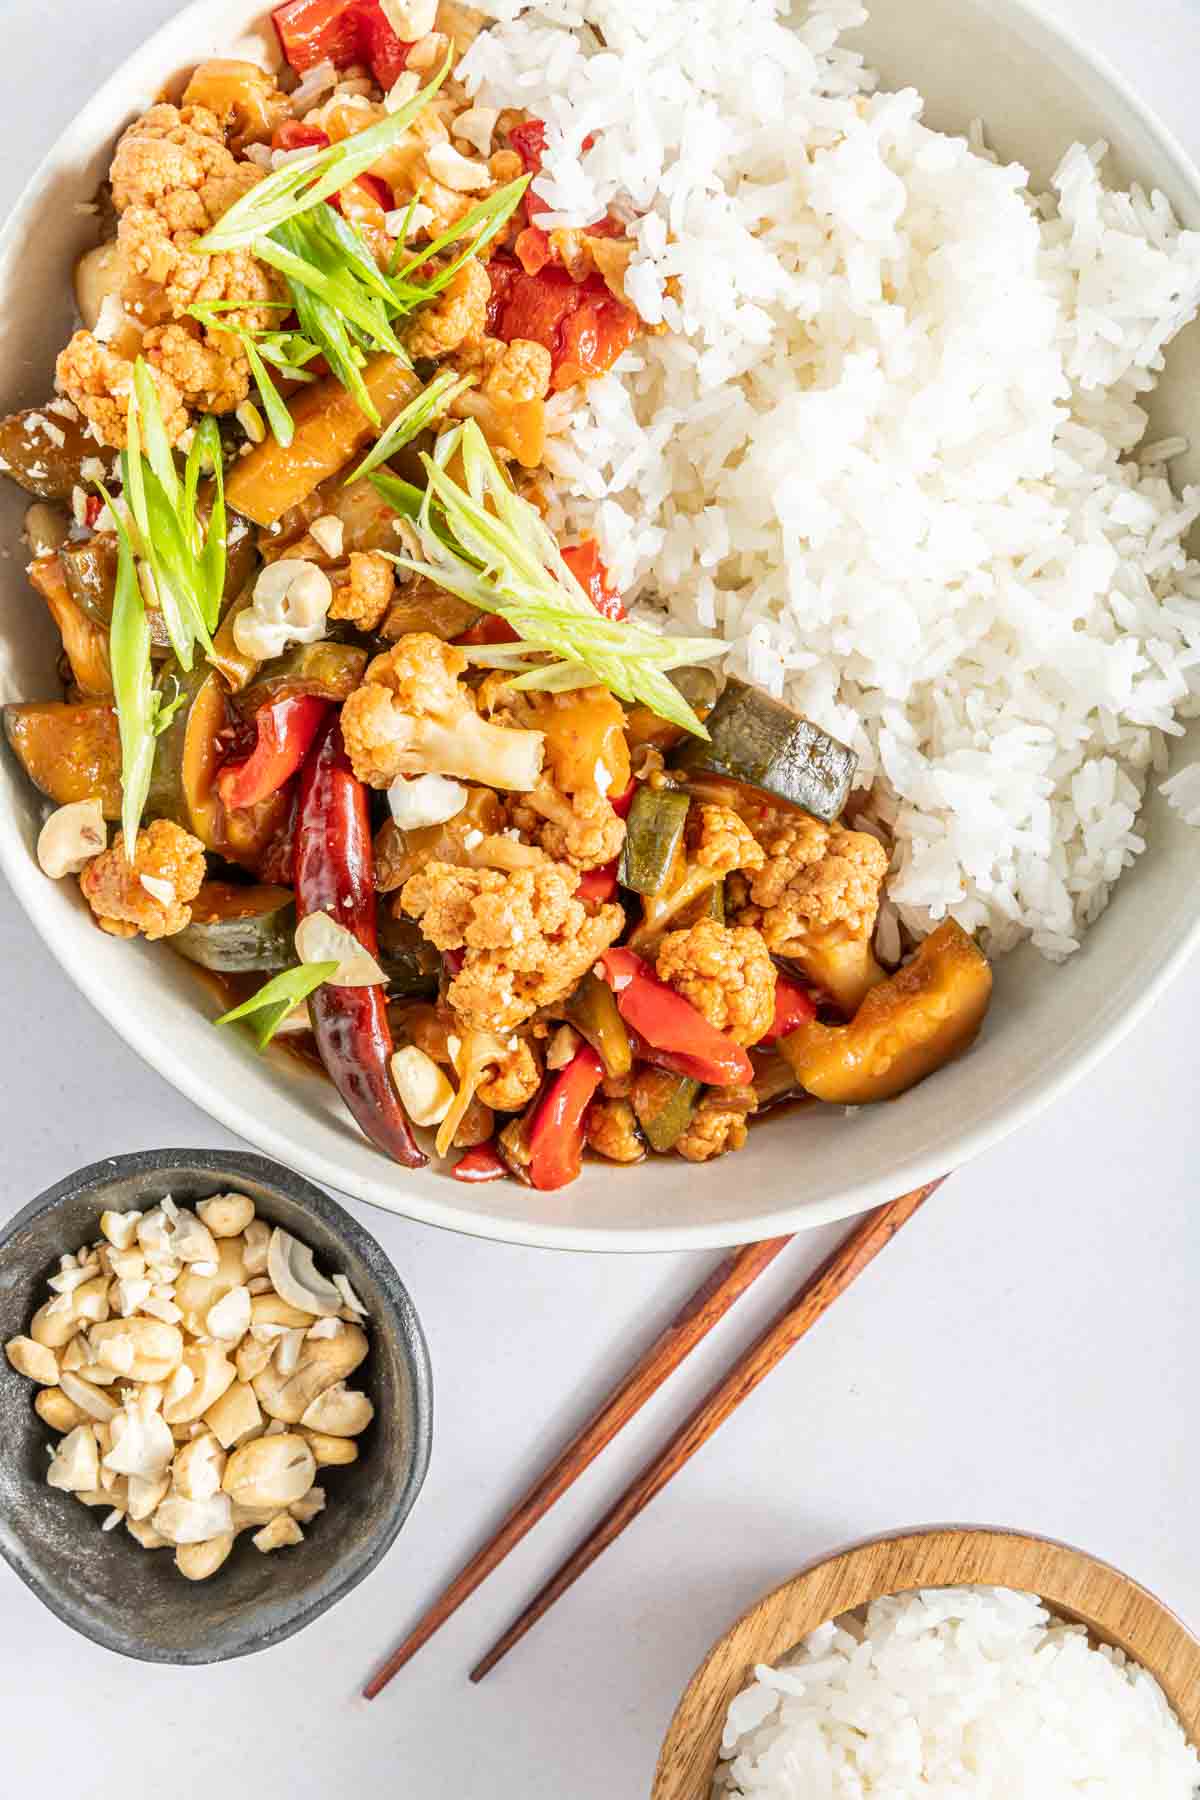 Kung pao cauliflower served in a bowl with white rice next to chopsticks and a dish with crushed peanuts.